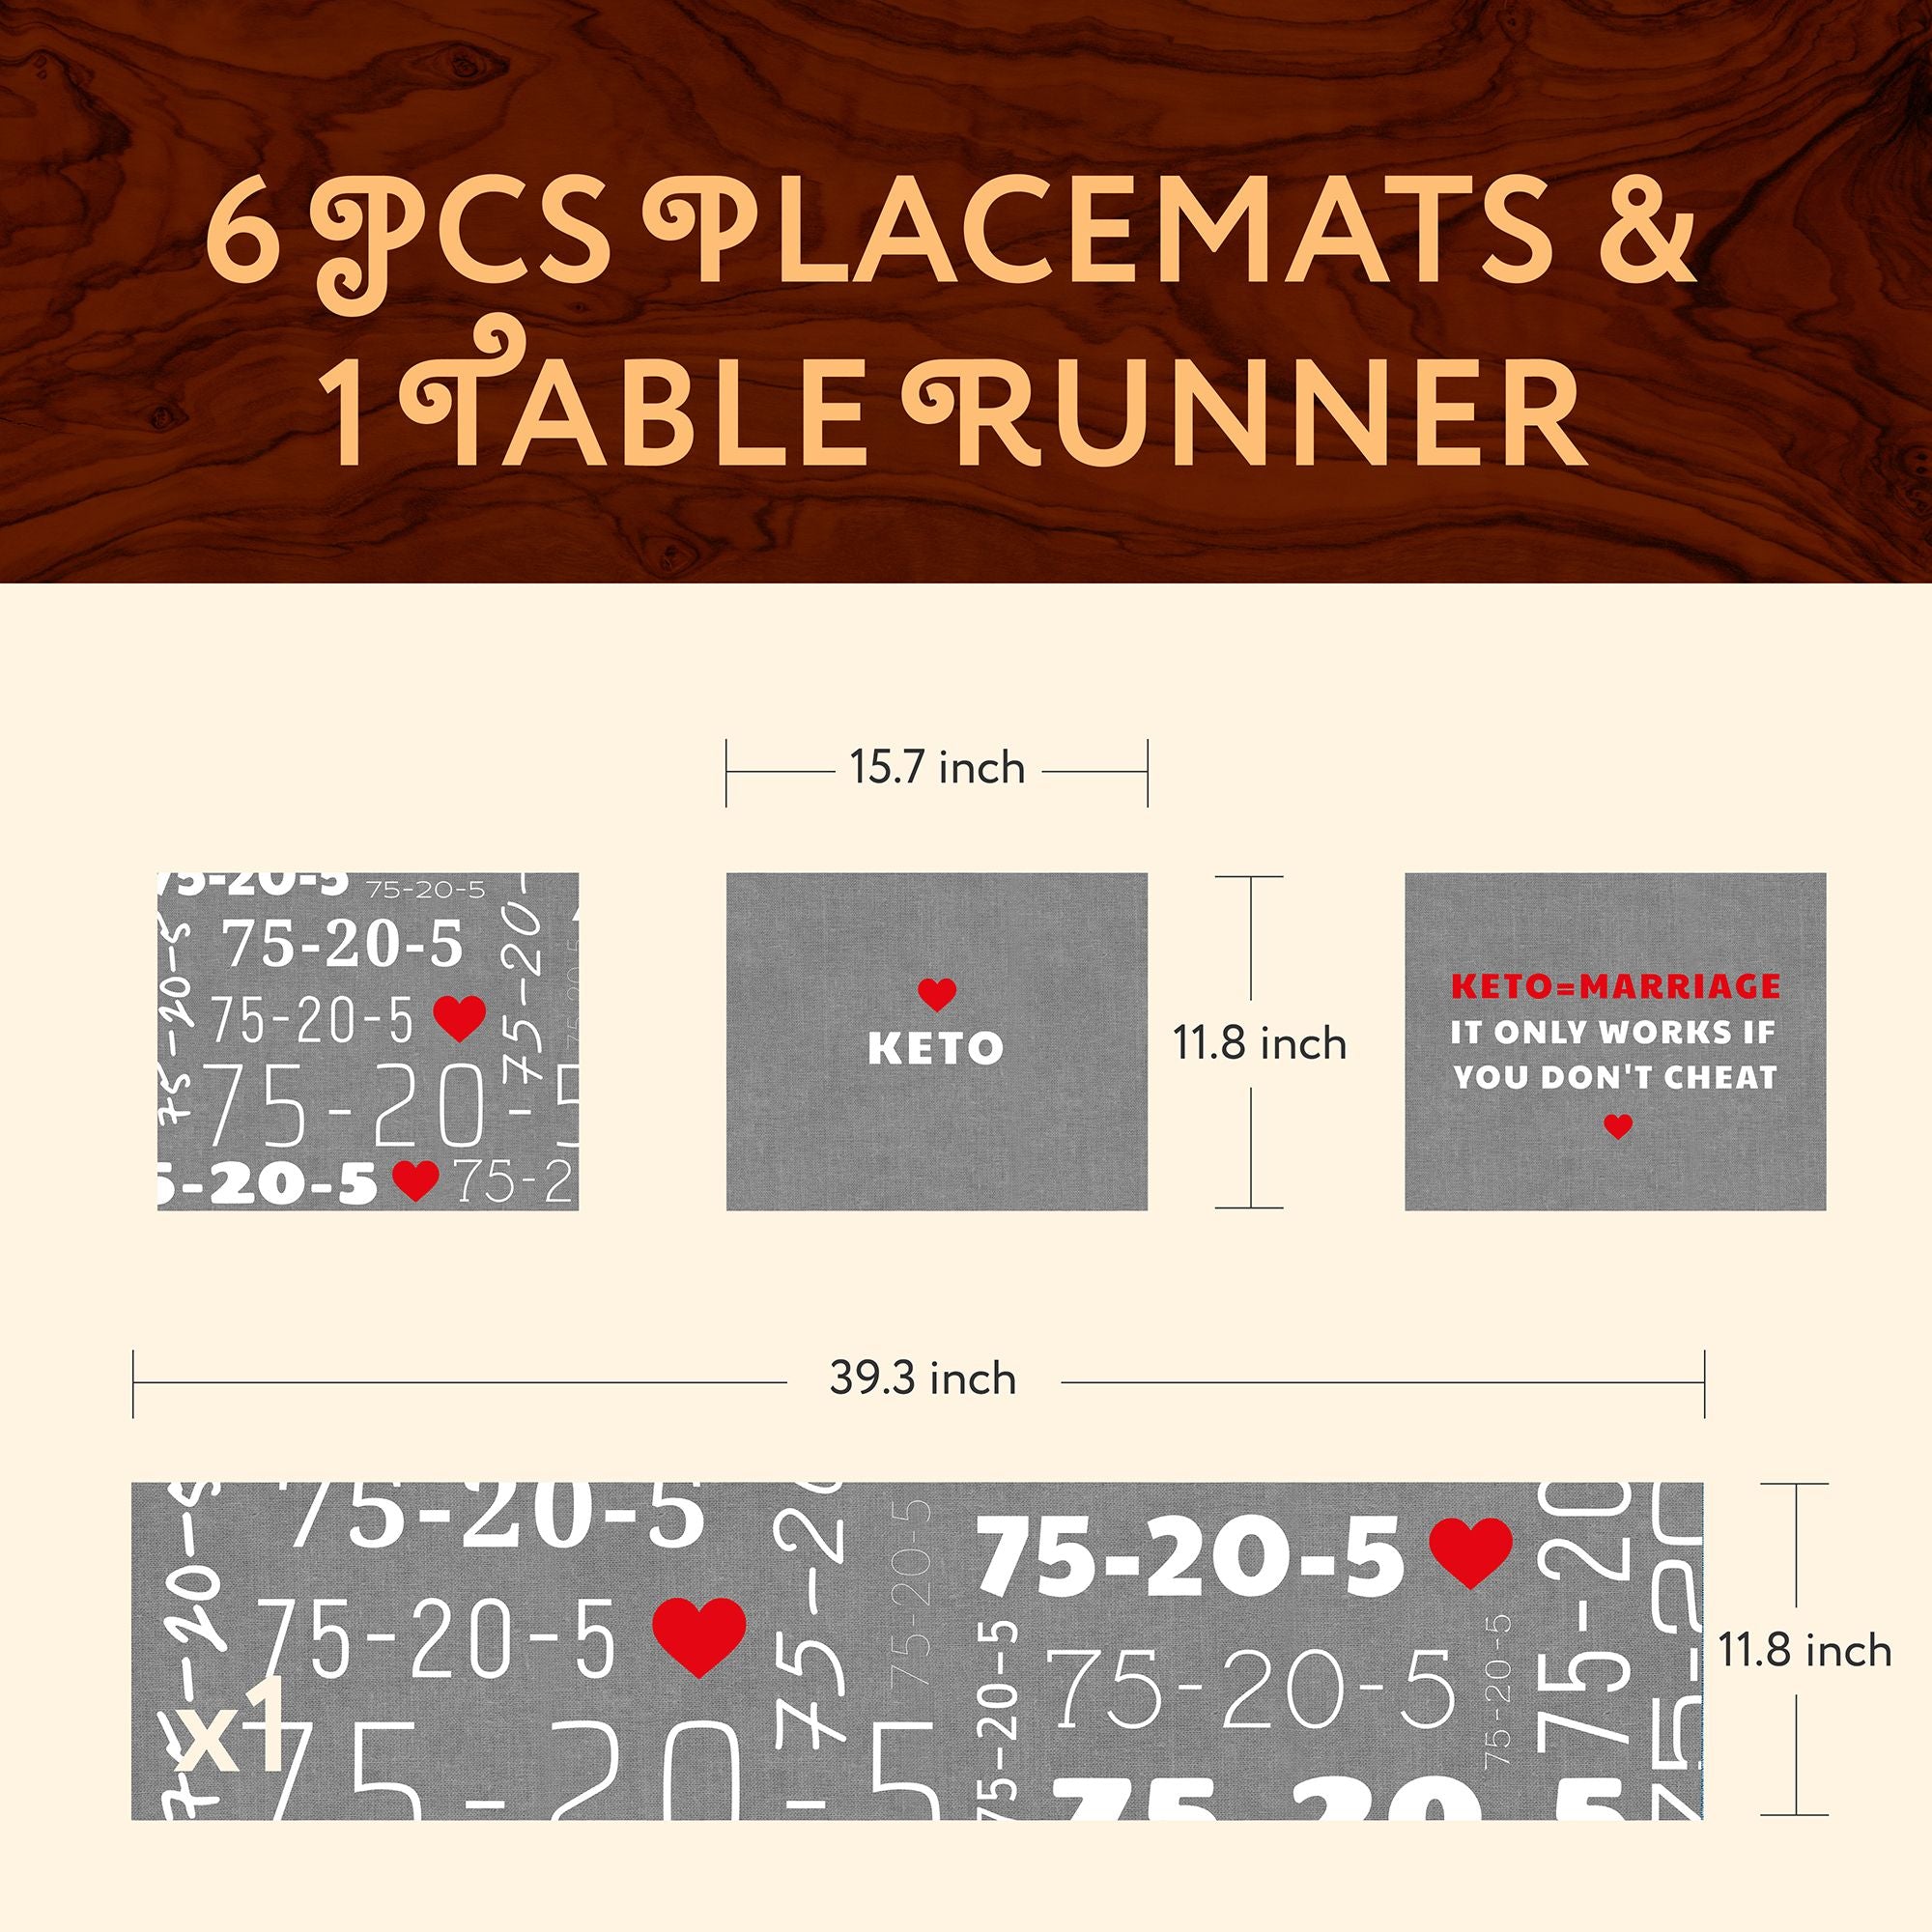 1 TABLE RUNNER + 6 PLACEMATS SET (KETO)